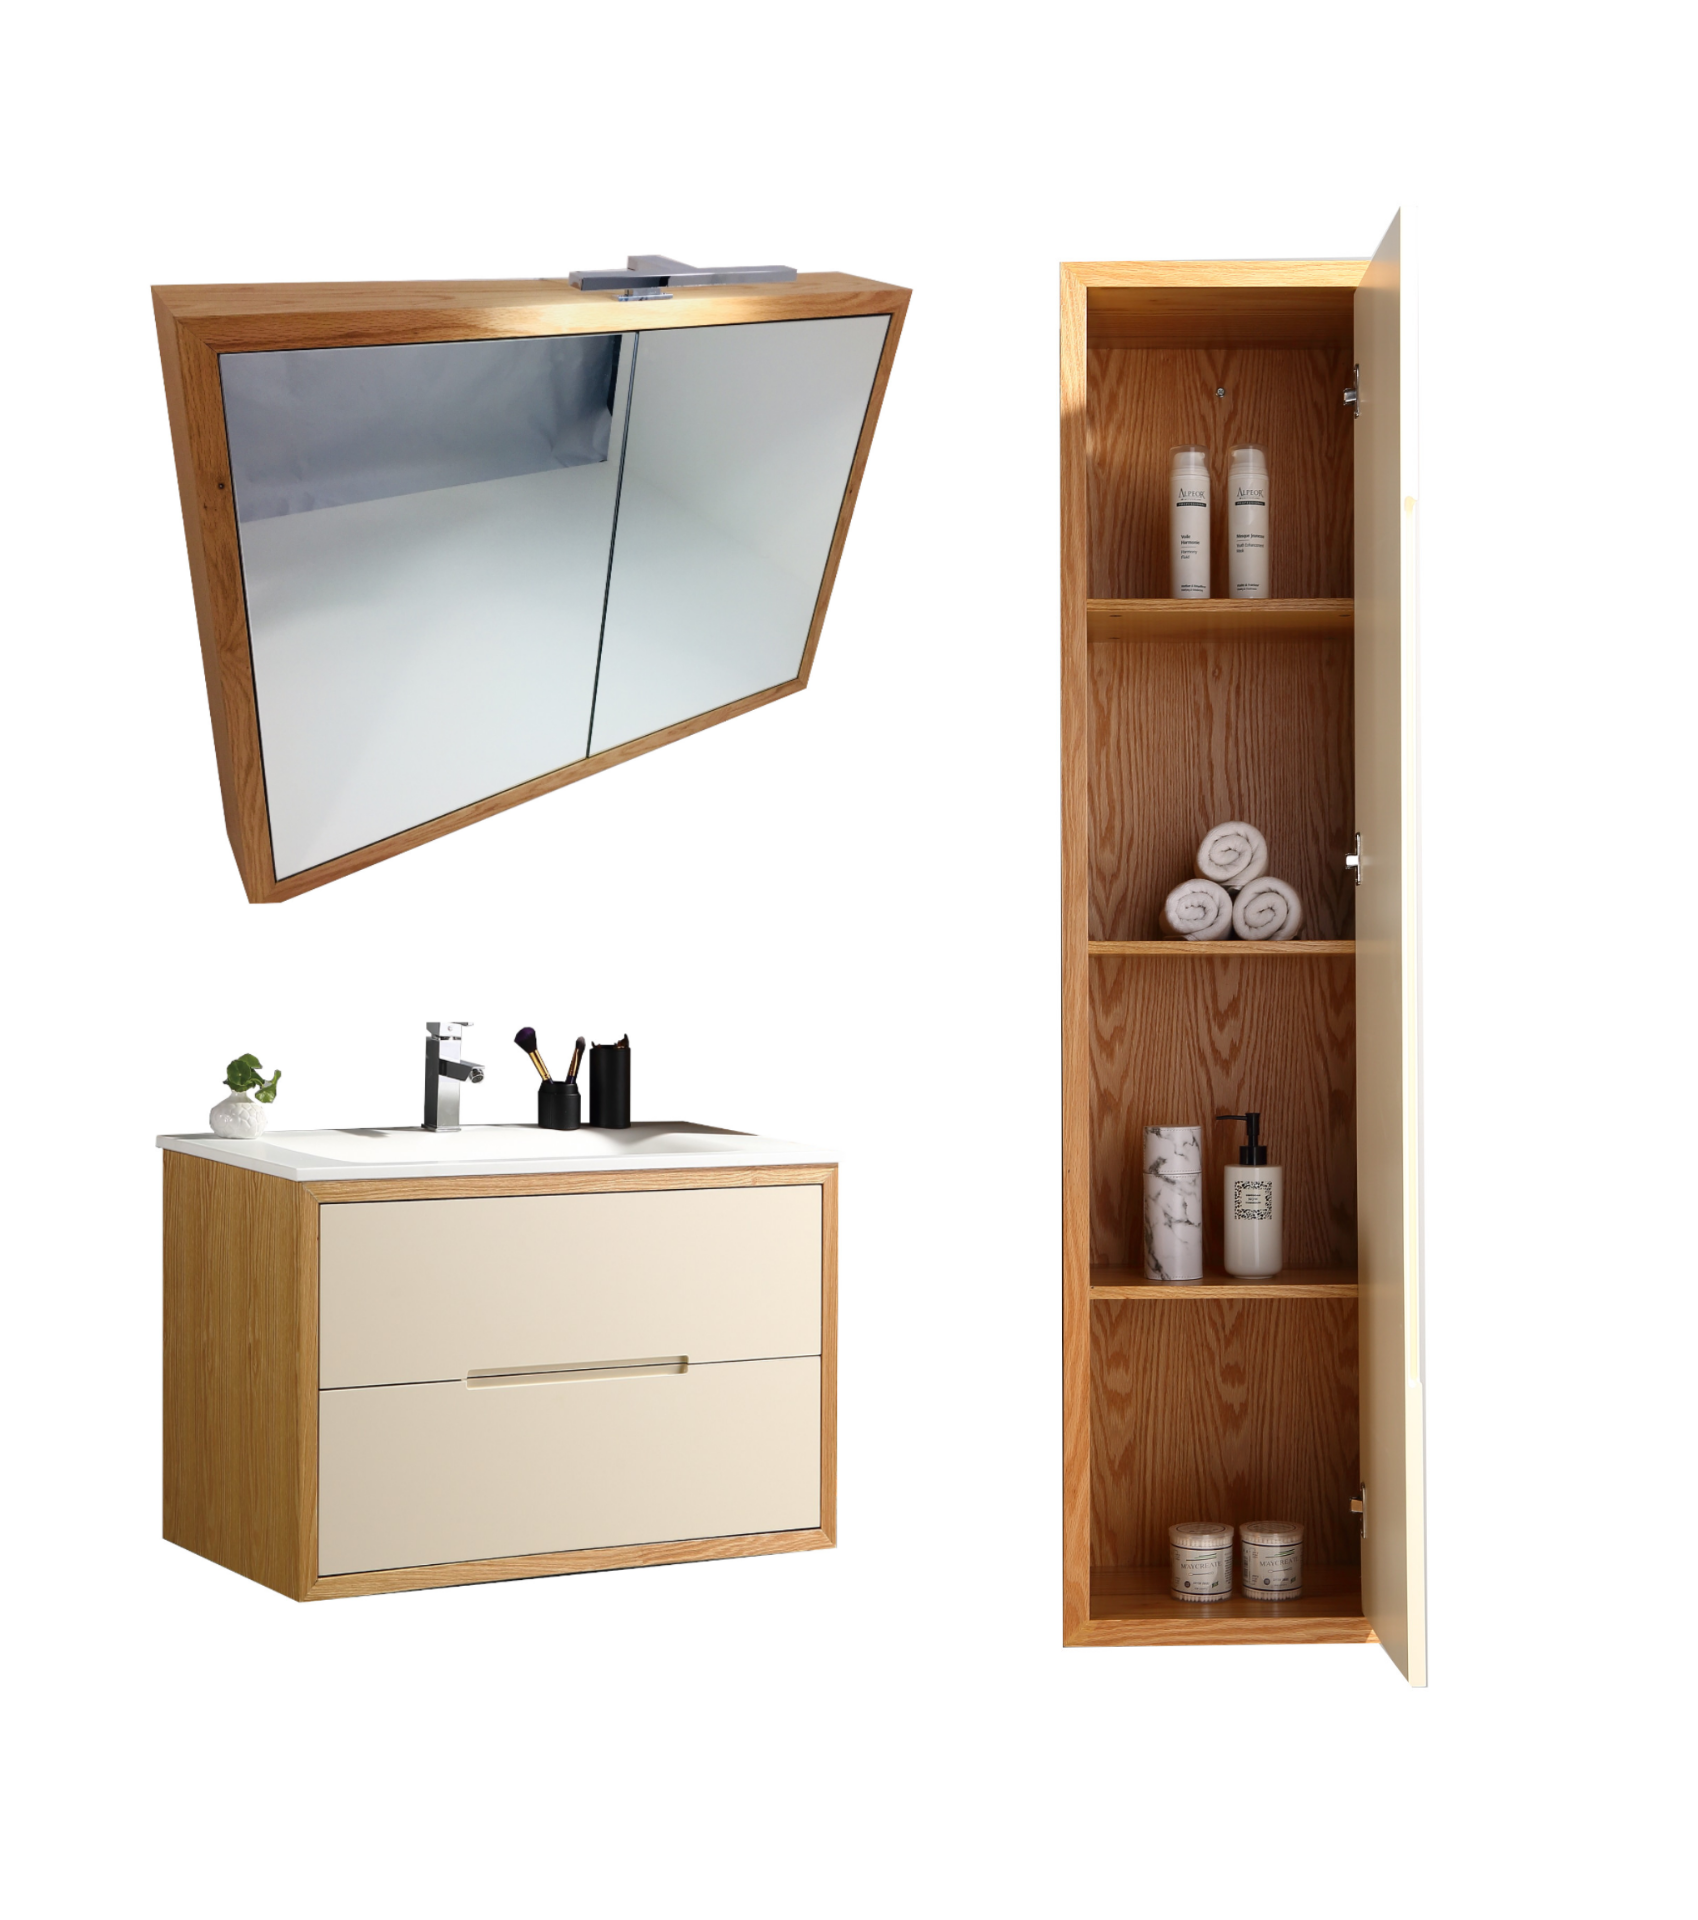 BRAND NEW Complete Vanity Unit Set in Beige with fixtures and fittings RRP £799.99 *NO VAT* - Image 4 of 5